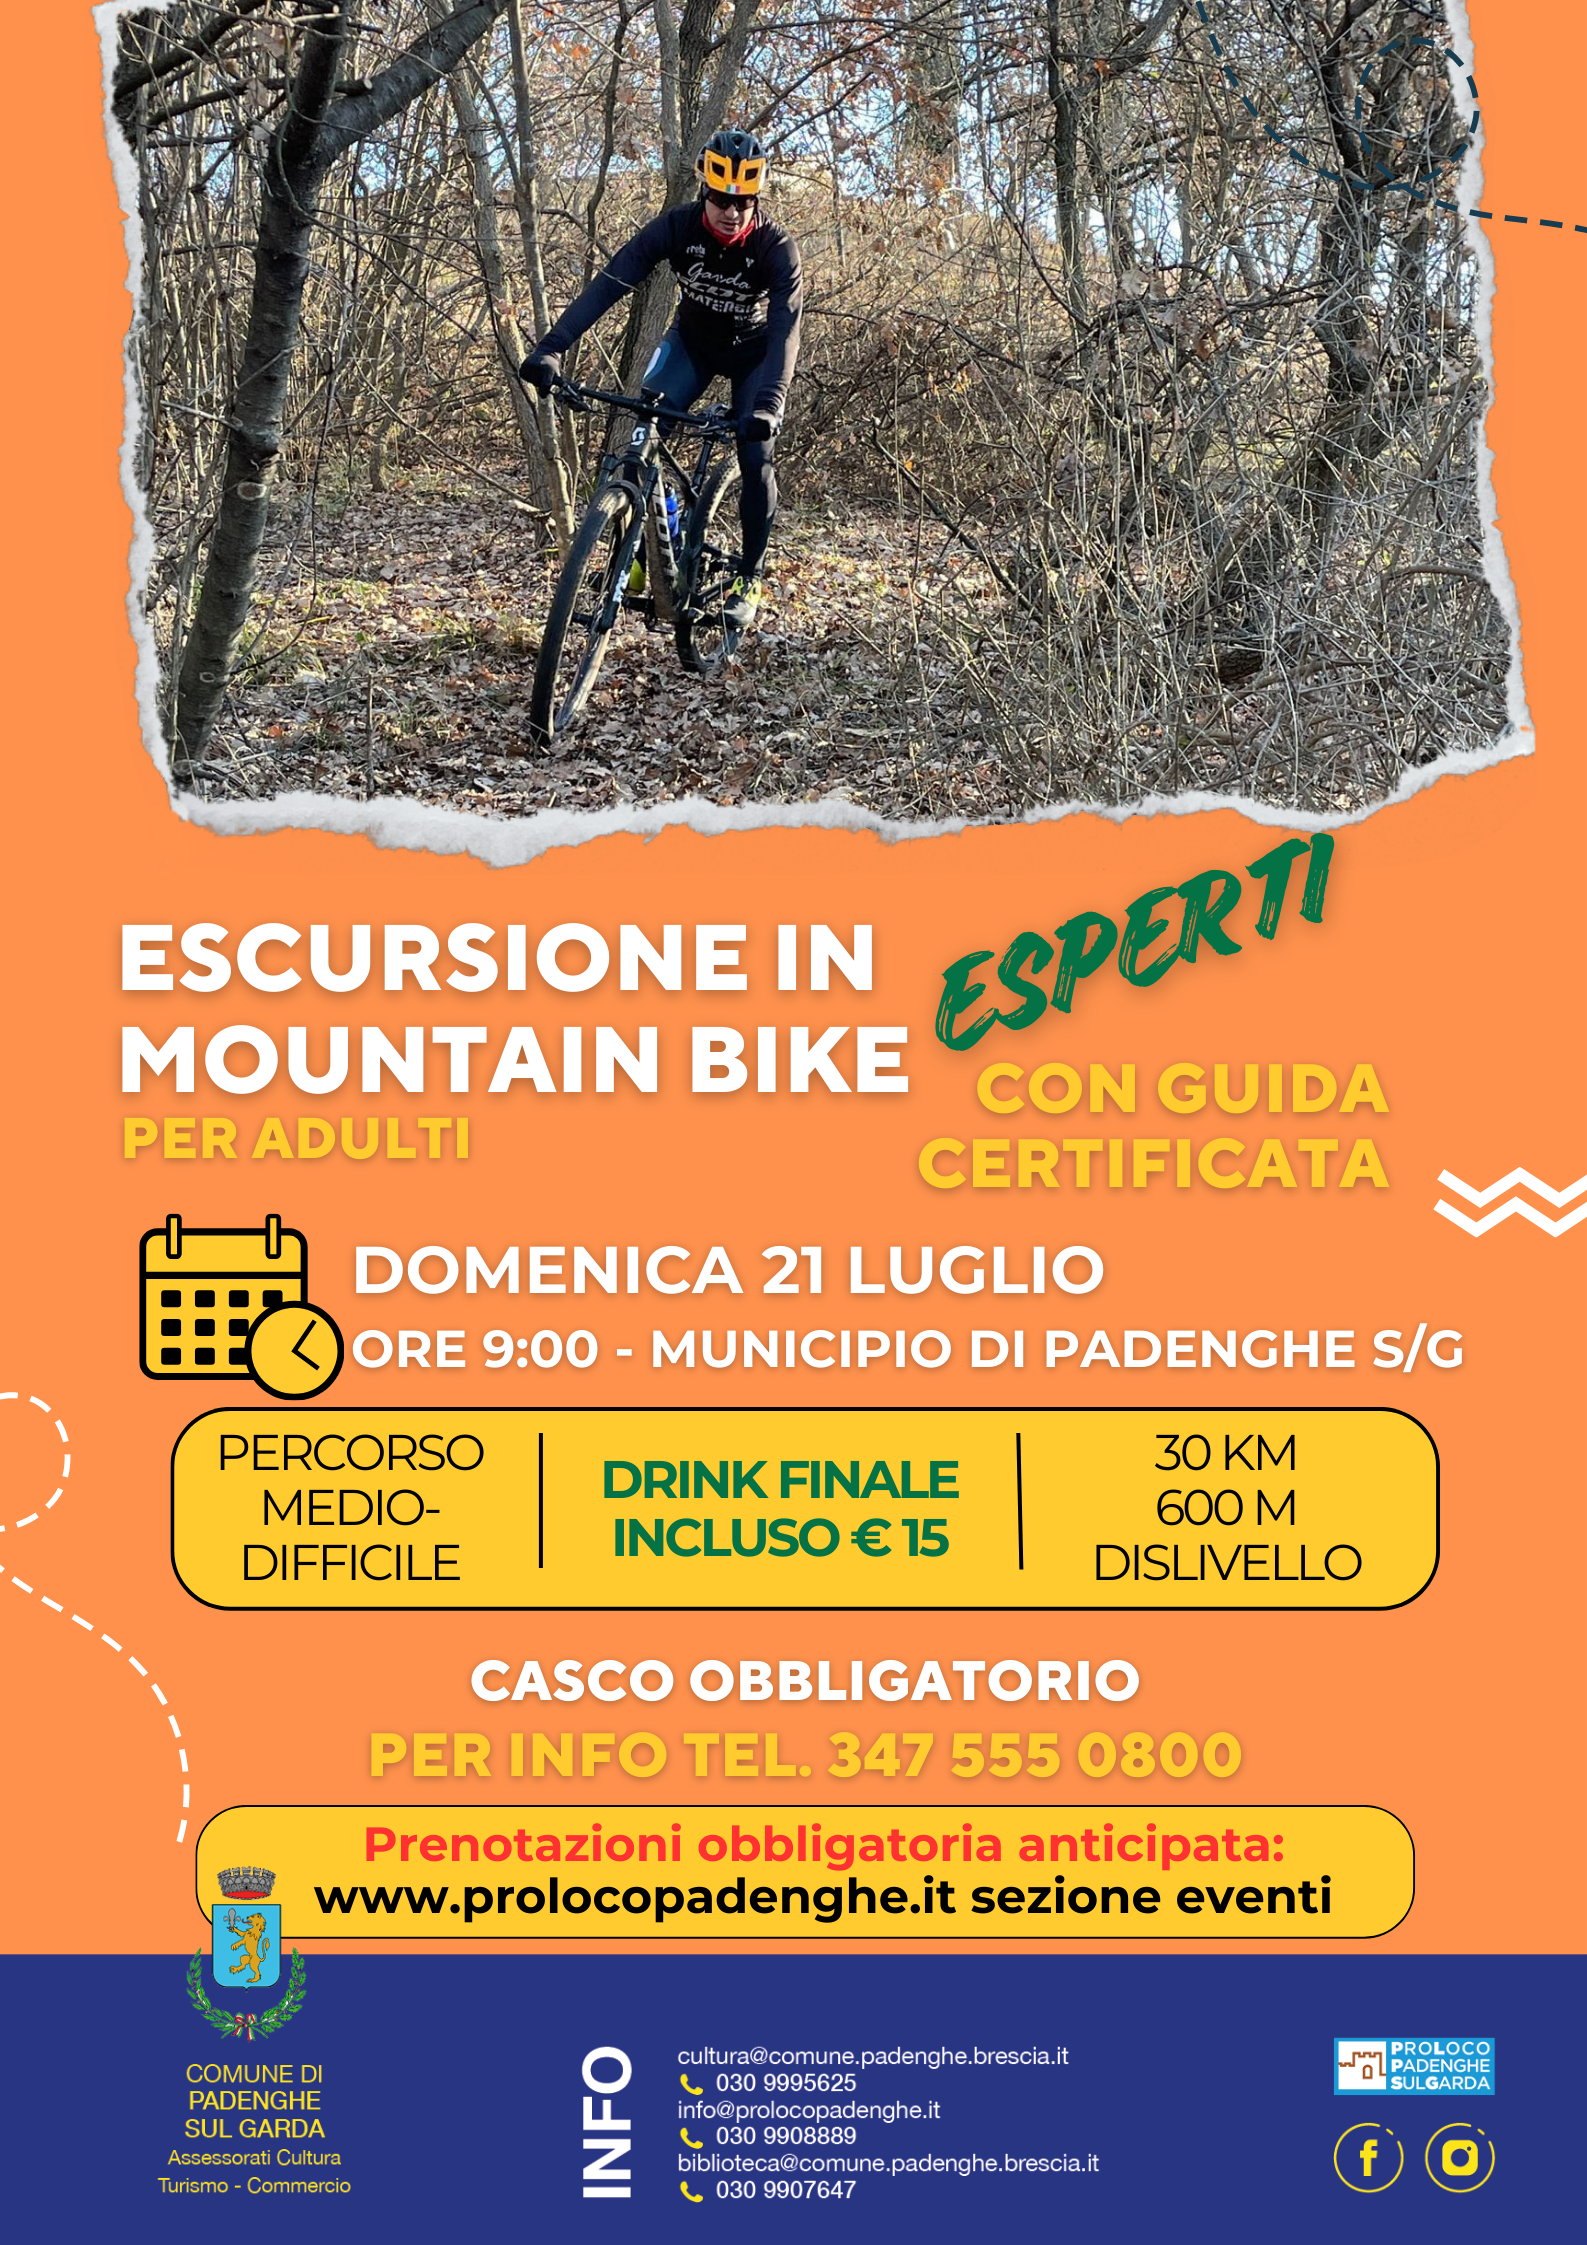 MOUNTAIN BIKE EXCURSION FOR EXPERTS 21st JULY